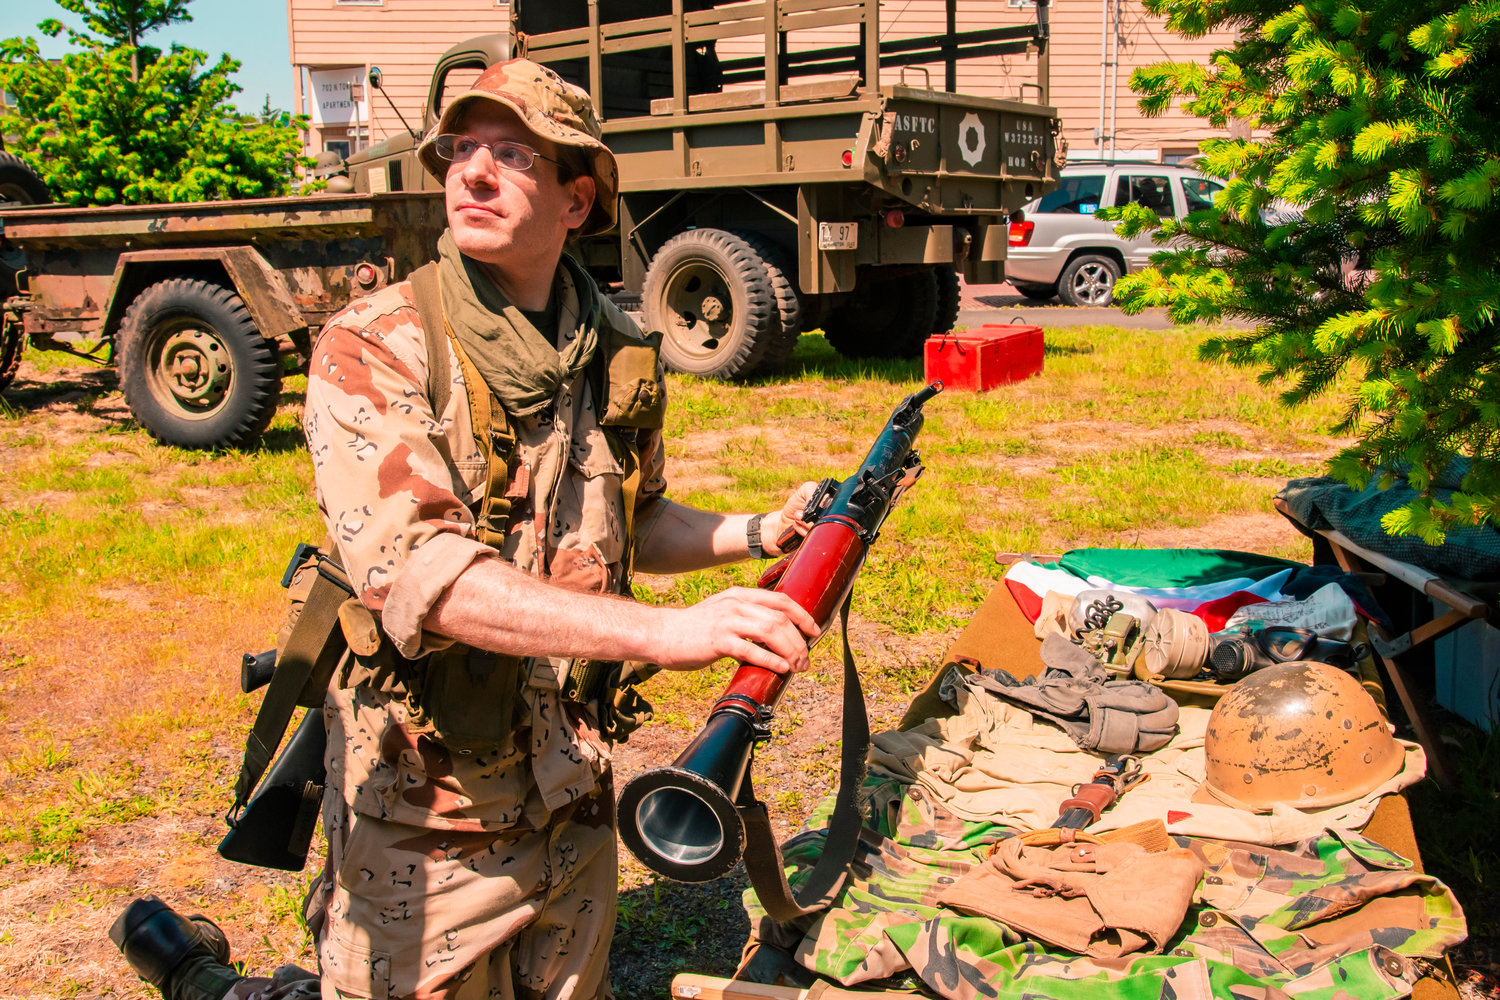 Ryan Buda holds up an RPG7 while showcasing his collection of military items during Armed Forces Day. Armed Forces Day was marked Saturday at America’s Team Museum at 622 N. Tower Ave., Centralia. Museum owner Peter Lahmann wrote on Facebook that there was a “great turnout.”  “Had about 12 vehicles and 15 living historians, sharing with the public on military history topics,” Lahmann wrote. “It was a nice day and we got to meet a lot of nice people.  There was emphasis for this event on the 30th Anniversary of Desert Storm. Thanks for all that were able to help out with this event.”